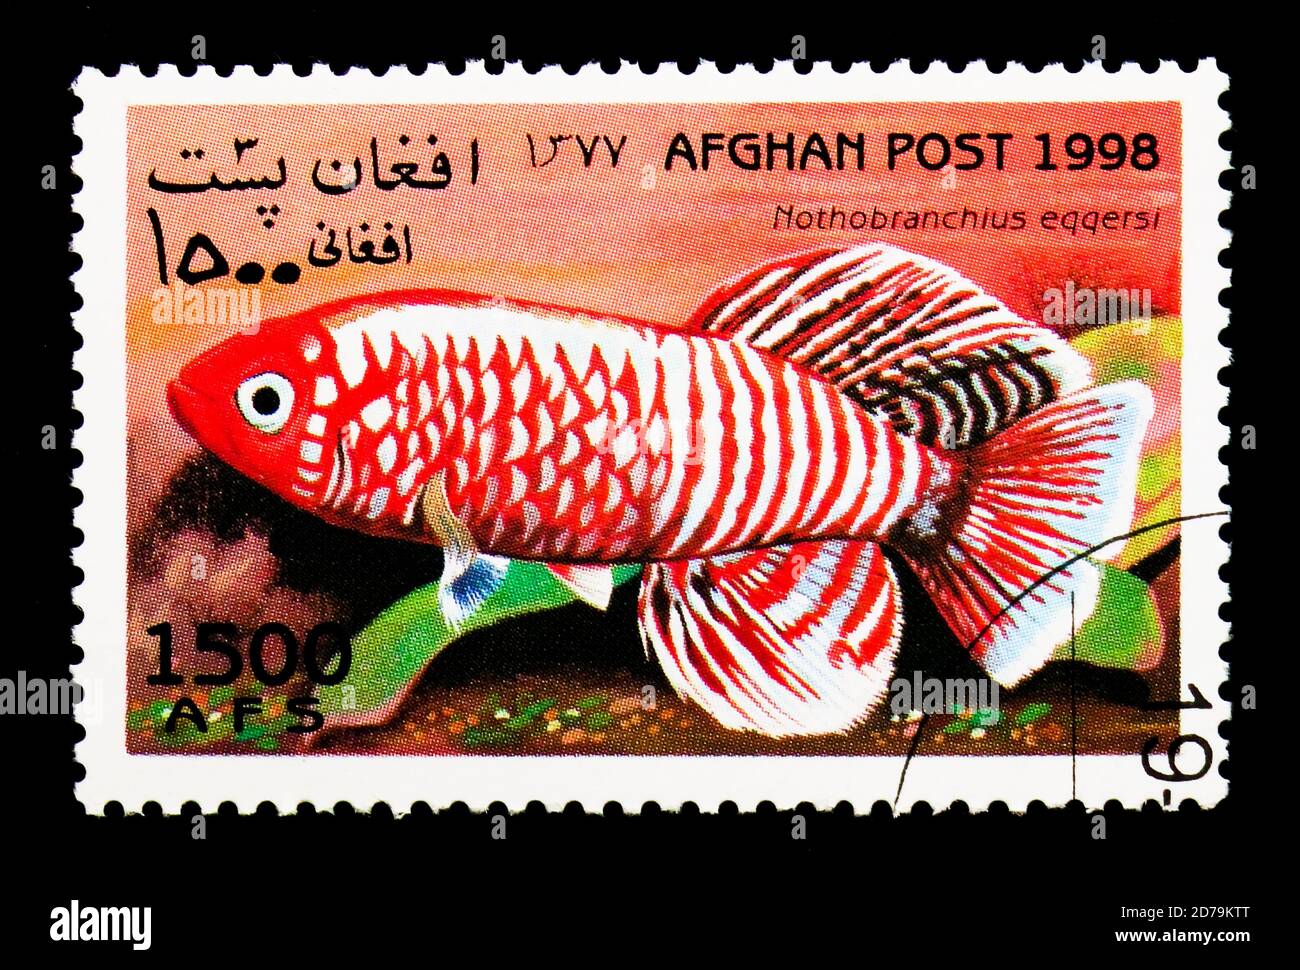 MOSCOW, RUSSIA - DECEMBER 21, 2017: A stamp printed in Afghanistan shows Killifish (Nothobranchius eggersi), Fish serie, circa 1998 Stock Photo